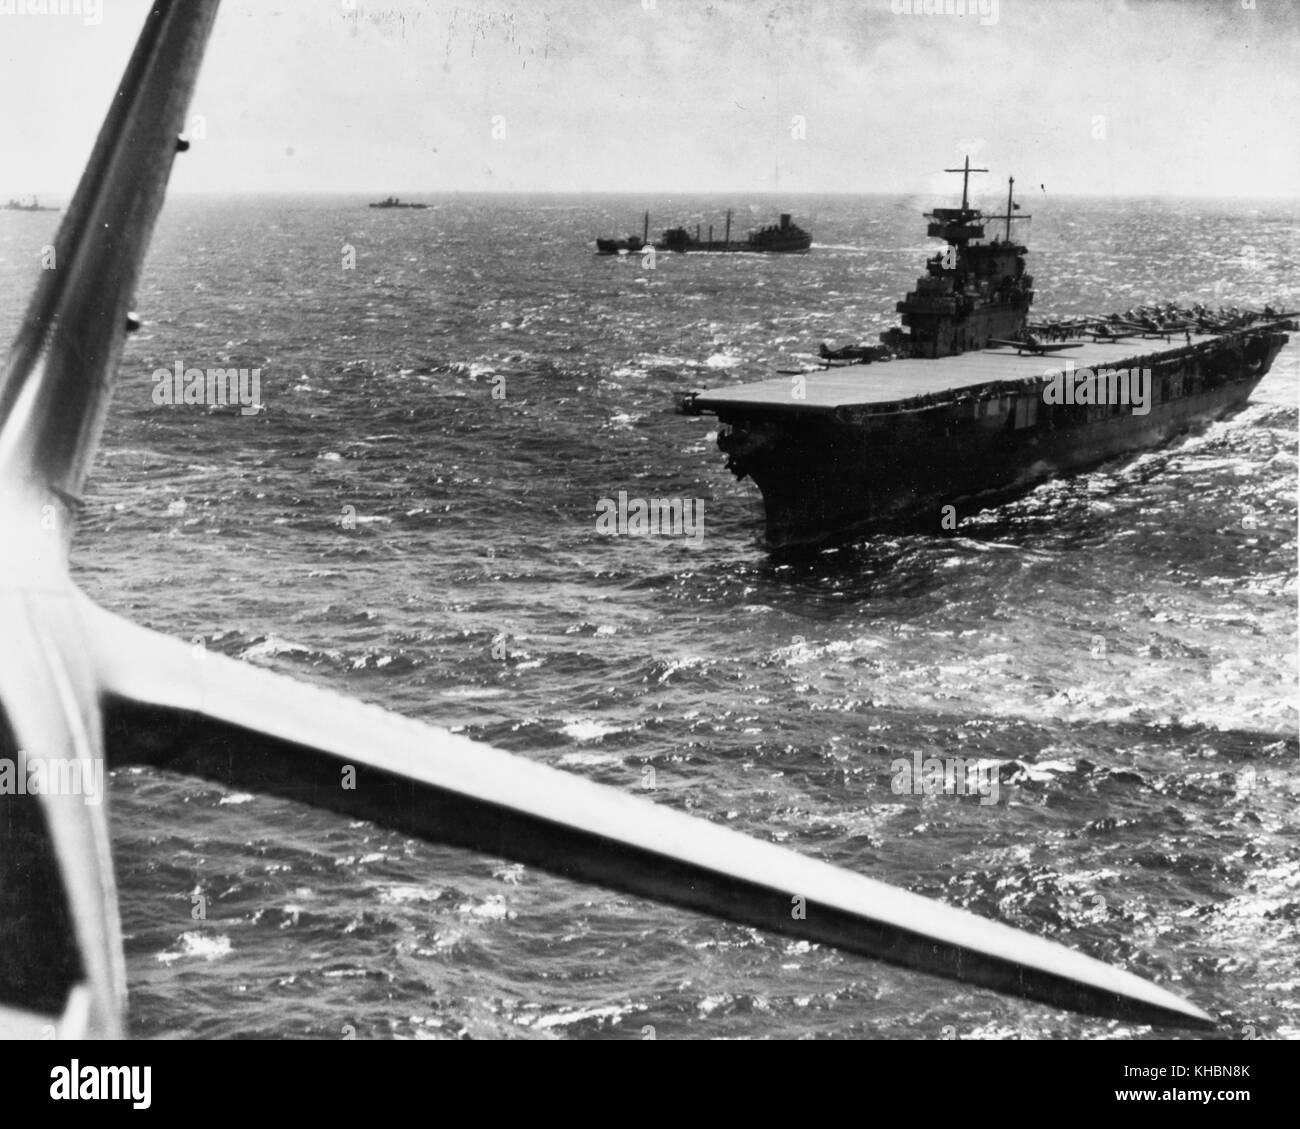 The U.S. Navy aircraft carrier USS Yorktown (CV-5) operating in the Pacific in February 1942, photographed from a Douglas TBD-1 torpedo plane that has just taken off from her deck. Other TBD and SBD aircraft are also ready to be launched. A F4F-3 'Wildcat' fighter is parked on the outrigger just forward of the island. The other ships in company include the fleet oiler USS Guadaloupe (AO-32), a destroyer and a heavy cruiser. Stock Photo